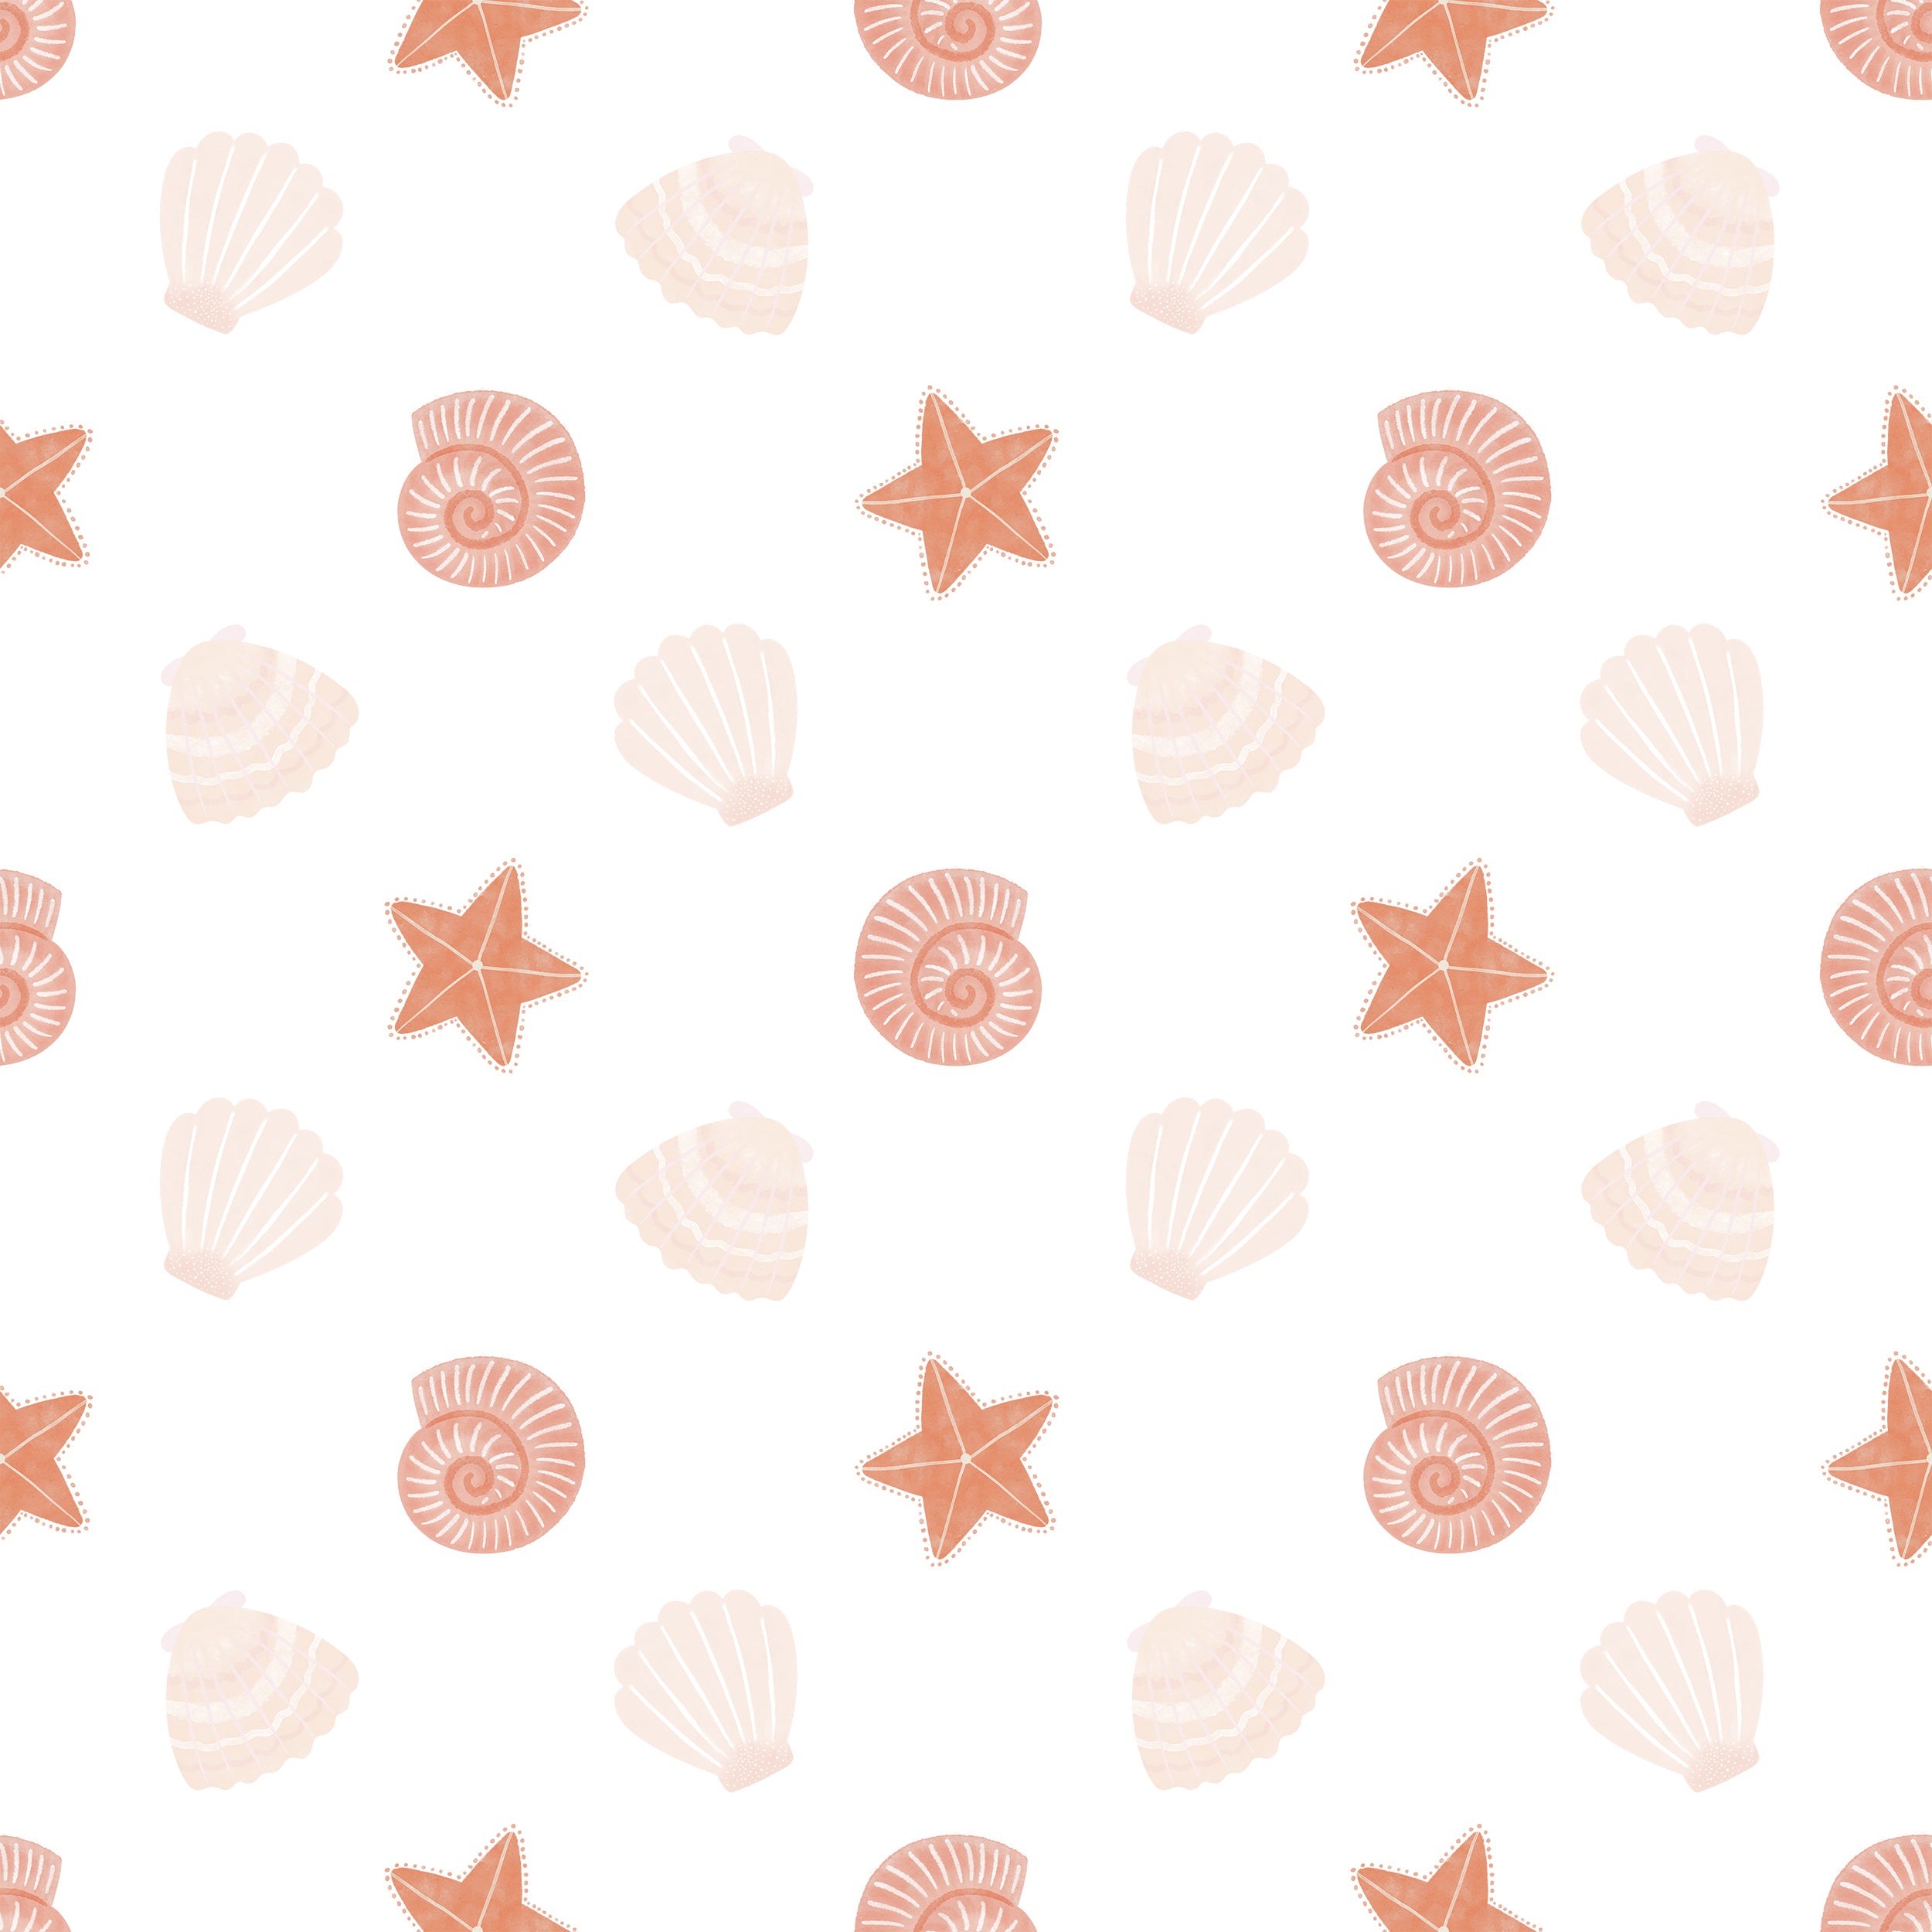 Detailed view of the Mermaid Shells Wallpaper showcasing an array of seashells and starfish in a repeating pattern. The soft orange and pink hues on a light background provide a gentle, beachy aesthetic suitable for various interiors.